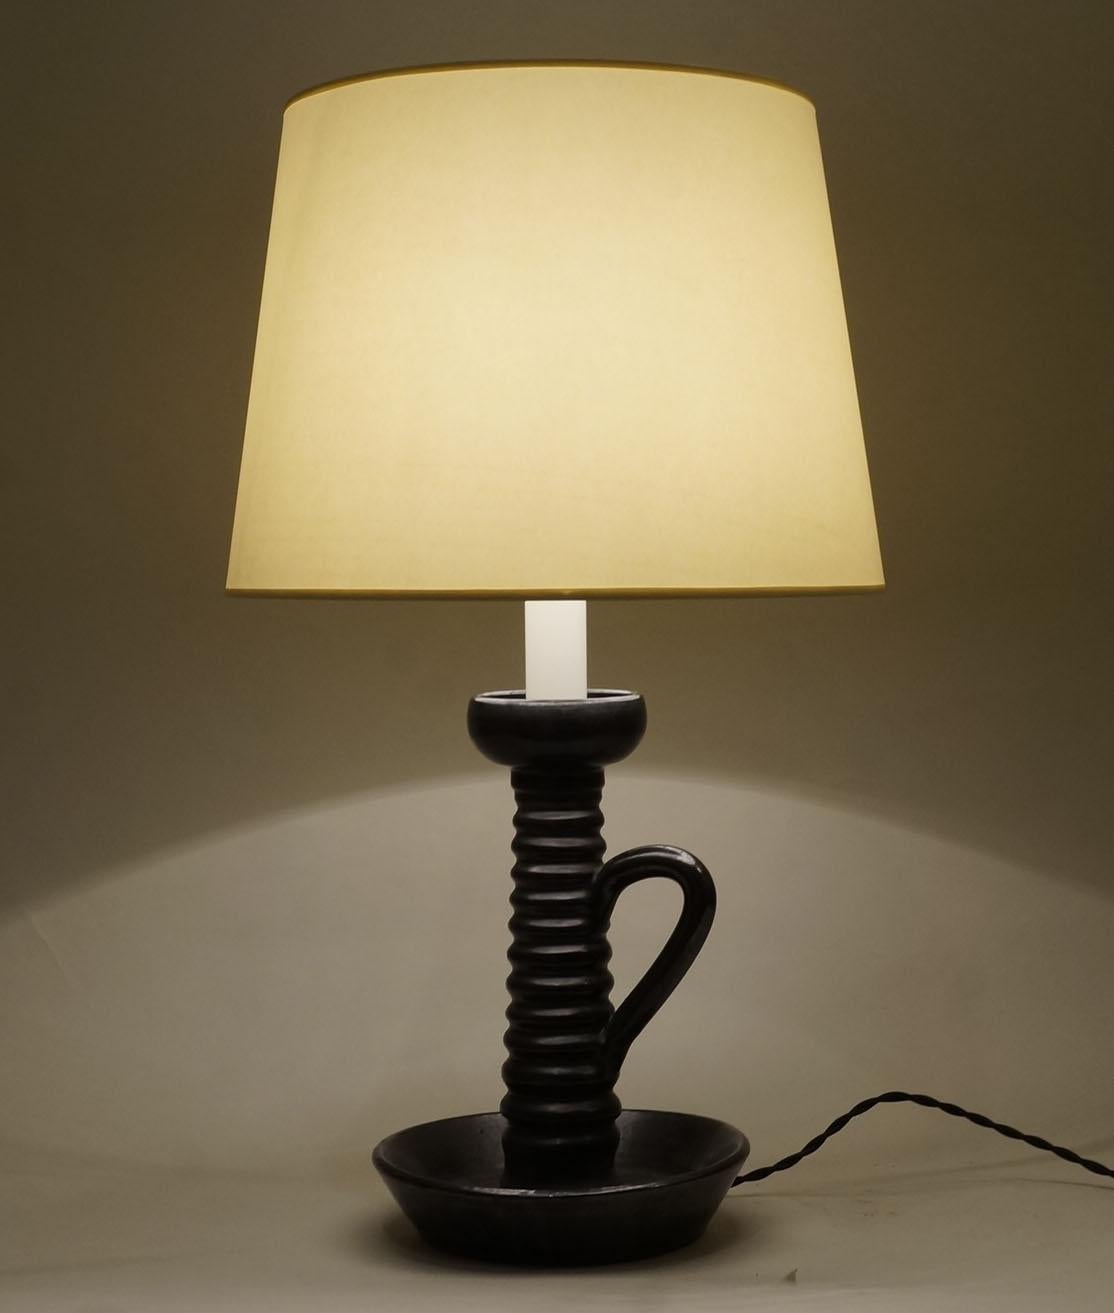 Black satin ceramic candleholder table lamp.
Custom made fabric lampshade.
Rewired with twisted silk cord.

Measures: Ceramic body height: 25 cm - 9.9 in.
Height with lampshade: 51 cm - 20.1 in.